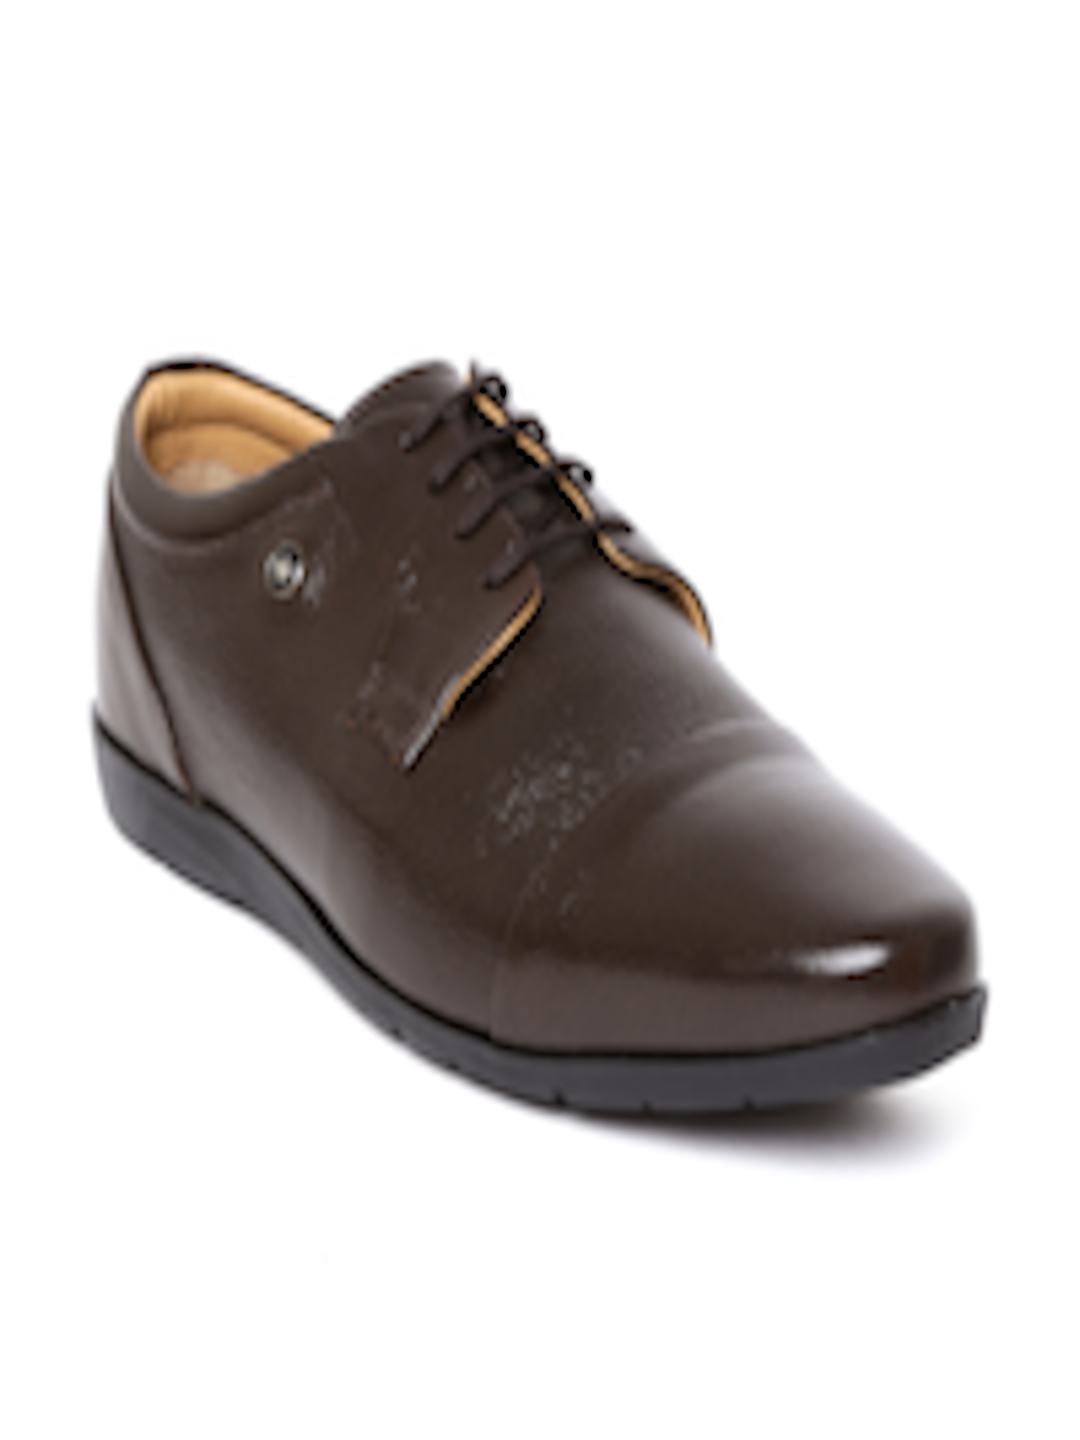 Buy Louis Philippe Men Coffee Brown Leather Formal Derbys - Formal Shoes for Men 9450659 | Myntra